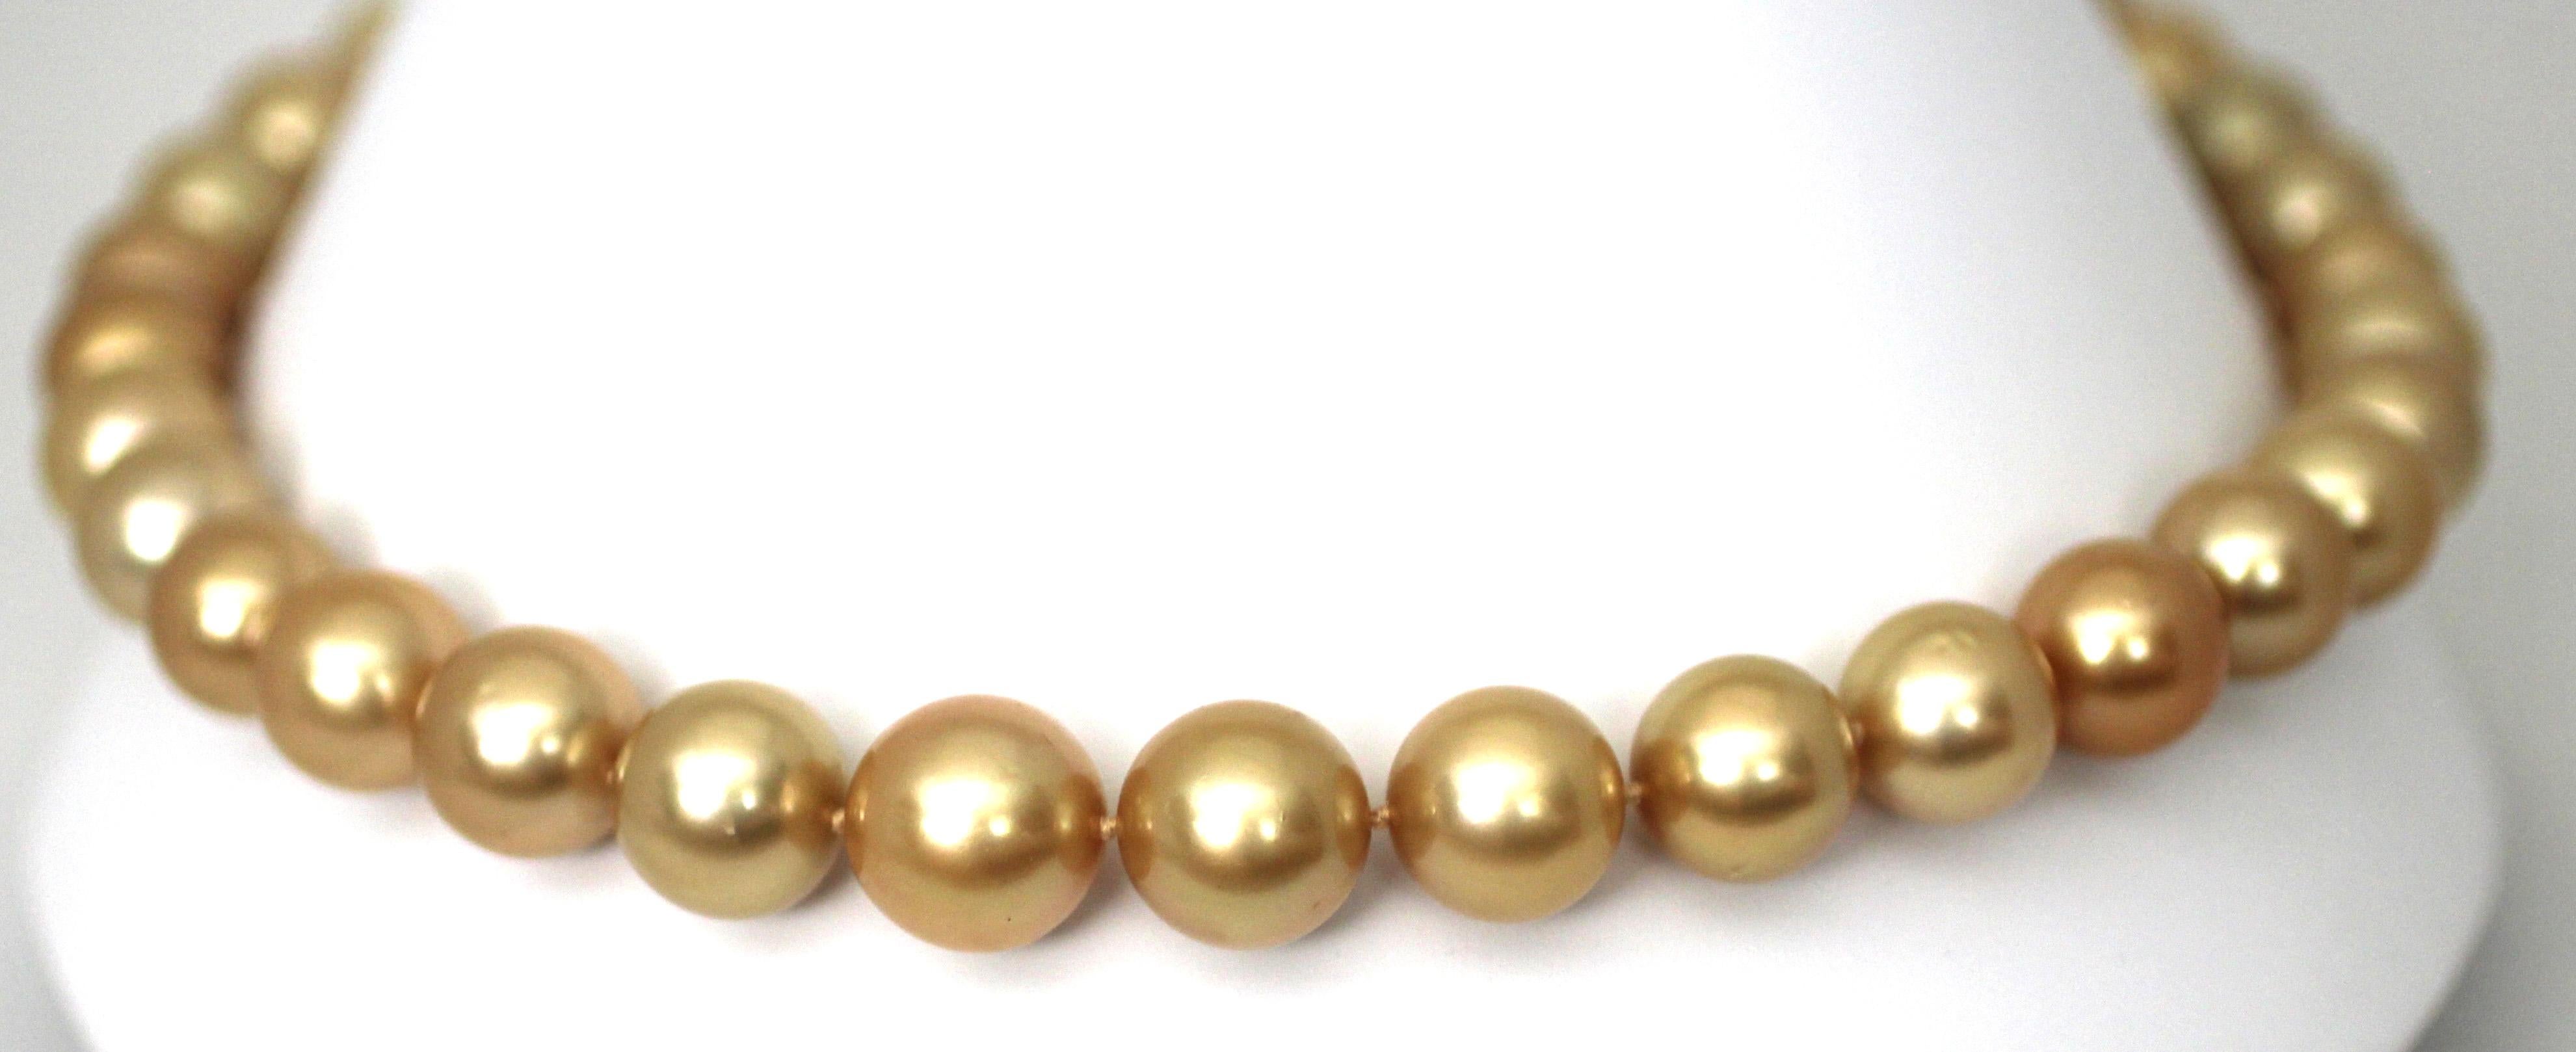 Hakimoto By Jewel Of Ocean  13x16 mm Natural color Golden South Sea Pearl Necklace
21